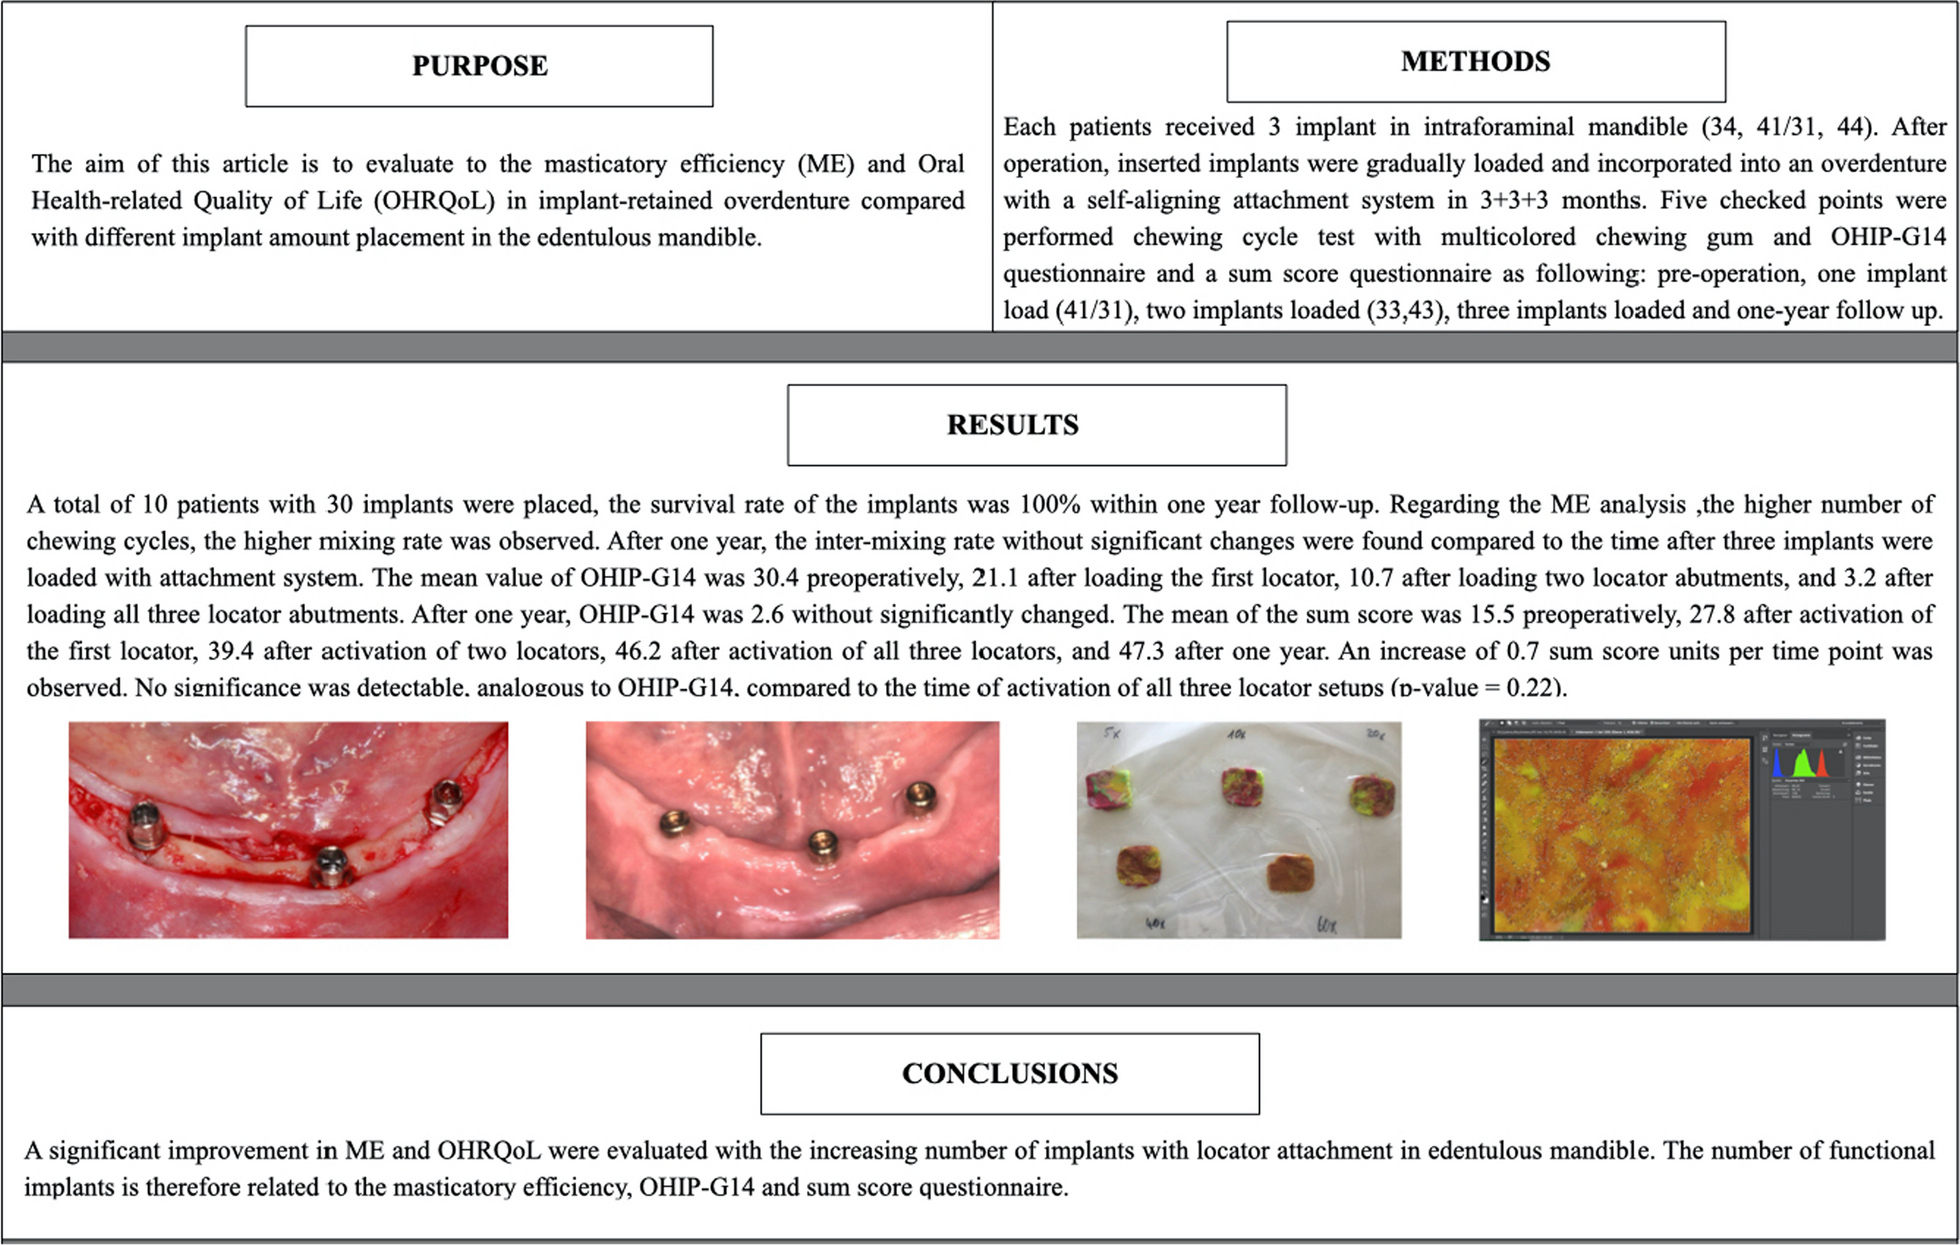 Evaluation of masticatory efficiency and OHRQoL in implant-retained overdenture with different numbers of implant in the edentulous mandible: a one-year follow-up prospective study